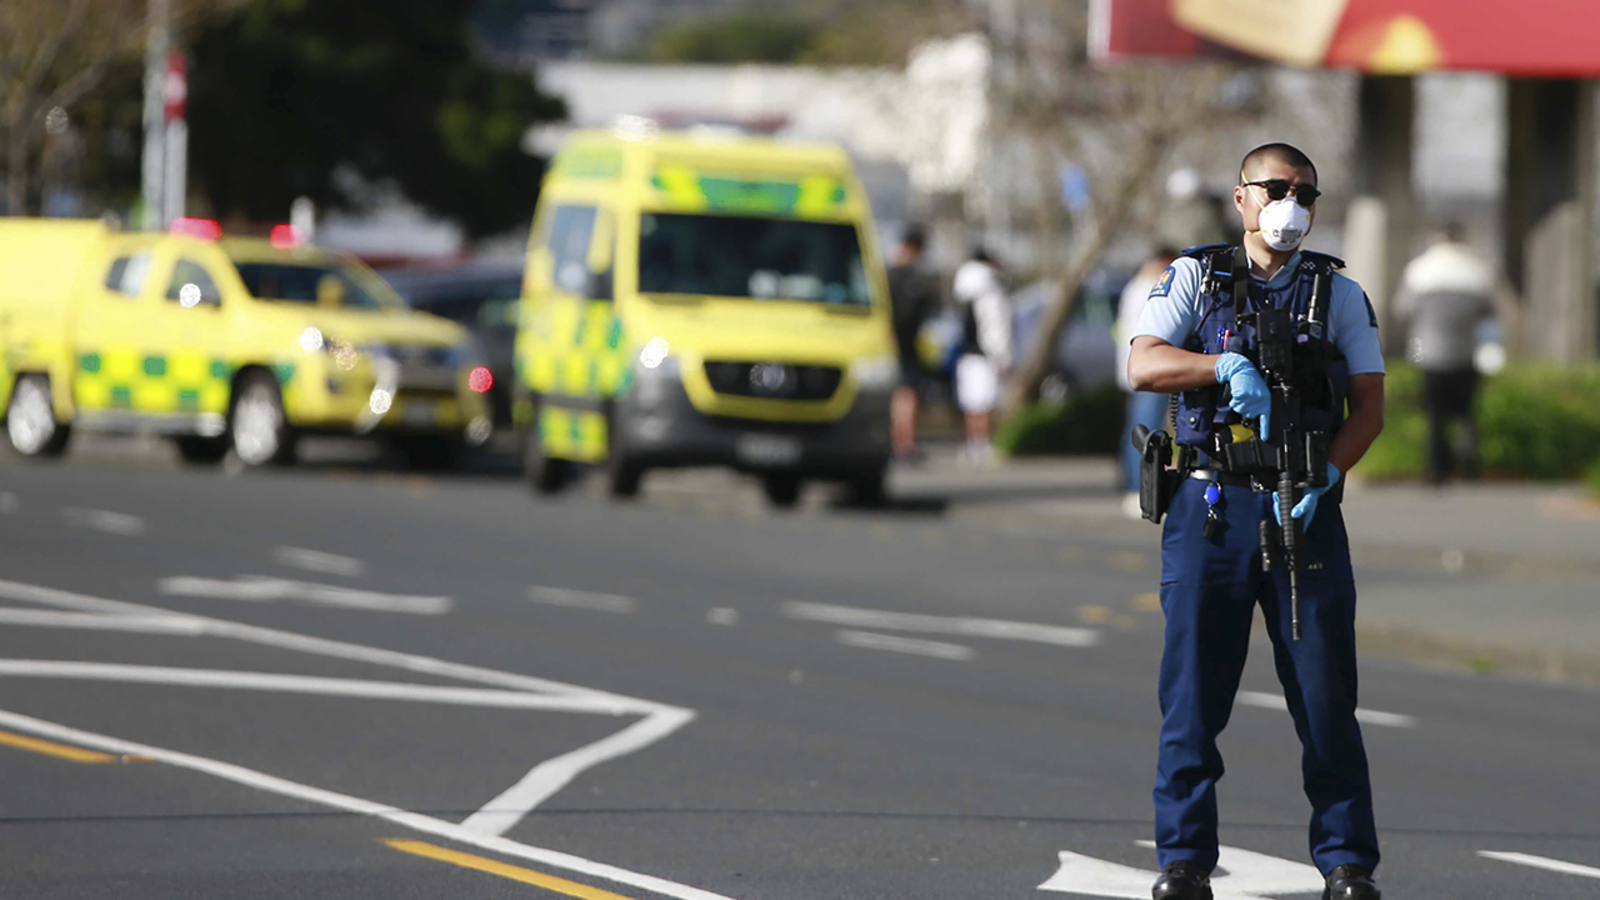 A police officer stands outside an Auckland supermarket, Friday, Sept. 3, 2021. New Zealand authorities said Friday they shot and killed a violent extremist after he entered a supermarket and stabbed and injured several shoppers. Prime Minister Jacinda Ardern described the incident as a terror attack. (Alex Burton/New Zealand Herald via AP)